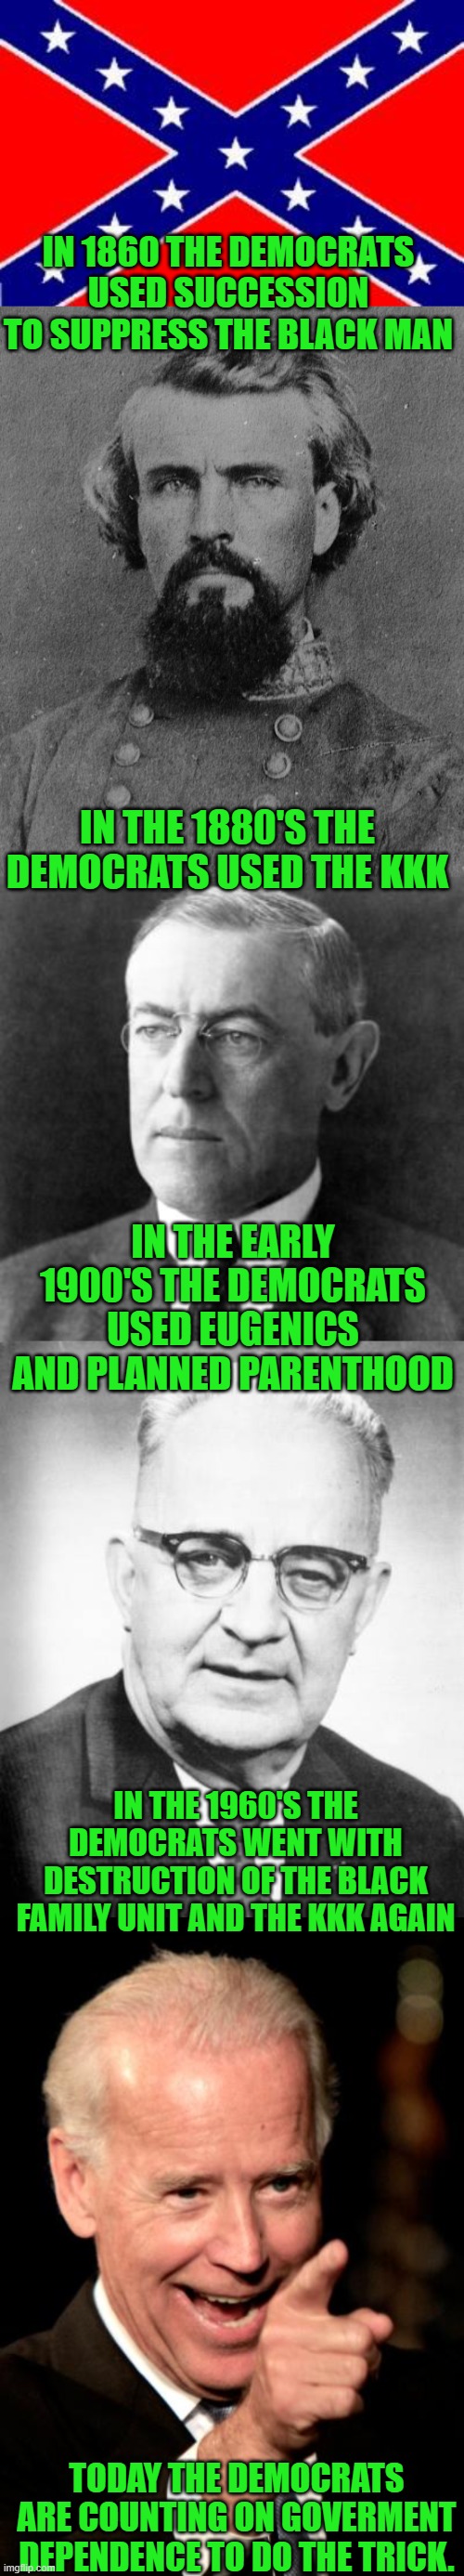 Yep | IN 1860 THE DEMOCRATS USED SUCCESSION TO SUPPRESS THE BLACK MAN; IN THE 1880'S THE DEMOCRATS USED THE KKK; IN THE EARLY 1900'S THE DEMOCRATS USED EUGENICS AND PLANNED PARENTHOOD; IN THE 1960'S THE DEMOCRATS WENT WITH DESTRUCTION OF THE BLACK FAMILY UNIT AND THE KKK AGAIN; TODAY THE DEMOCRATS ARE COUNTING ON GOVERMENT DEPENDENCE TO DO THE TRICK. | image tagged in dixie flag,nathan bedford forrest,woodrow wilson,bull connor,memes,smilin biden | made w/ Imgflip meme maker